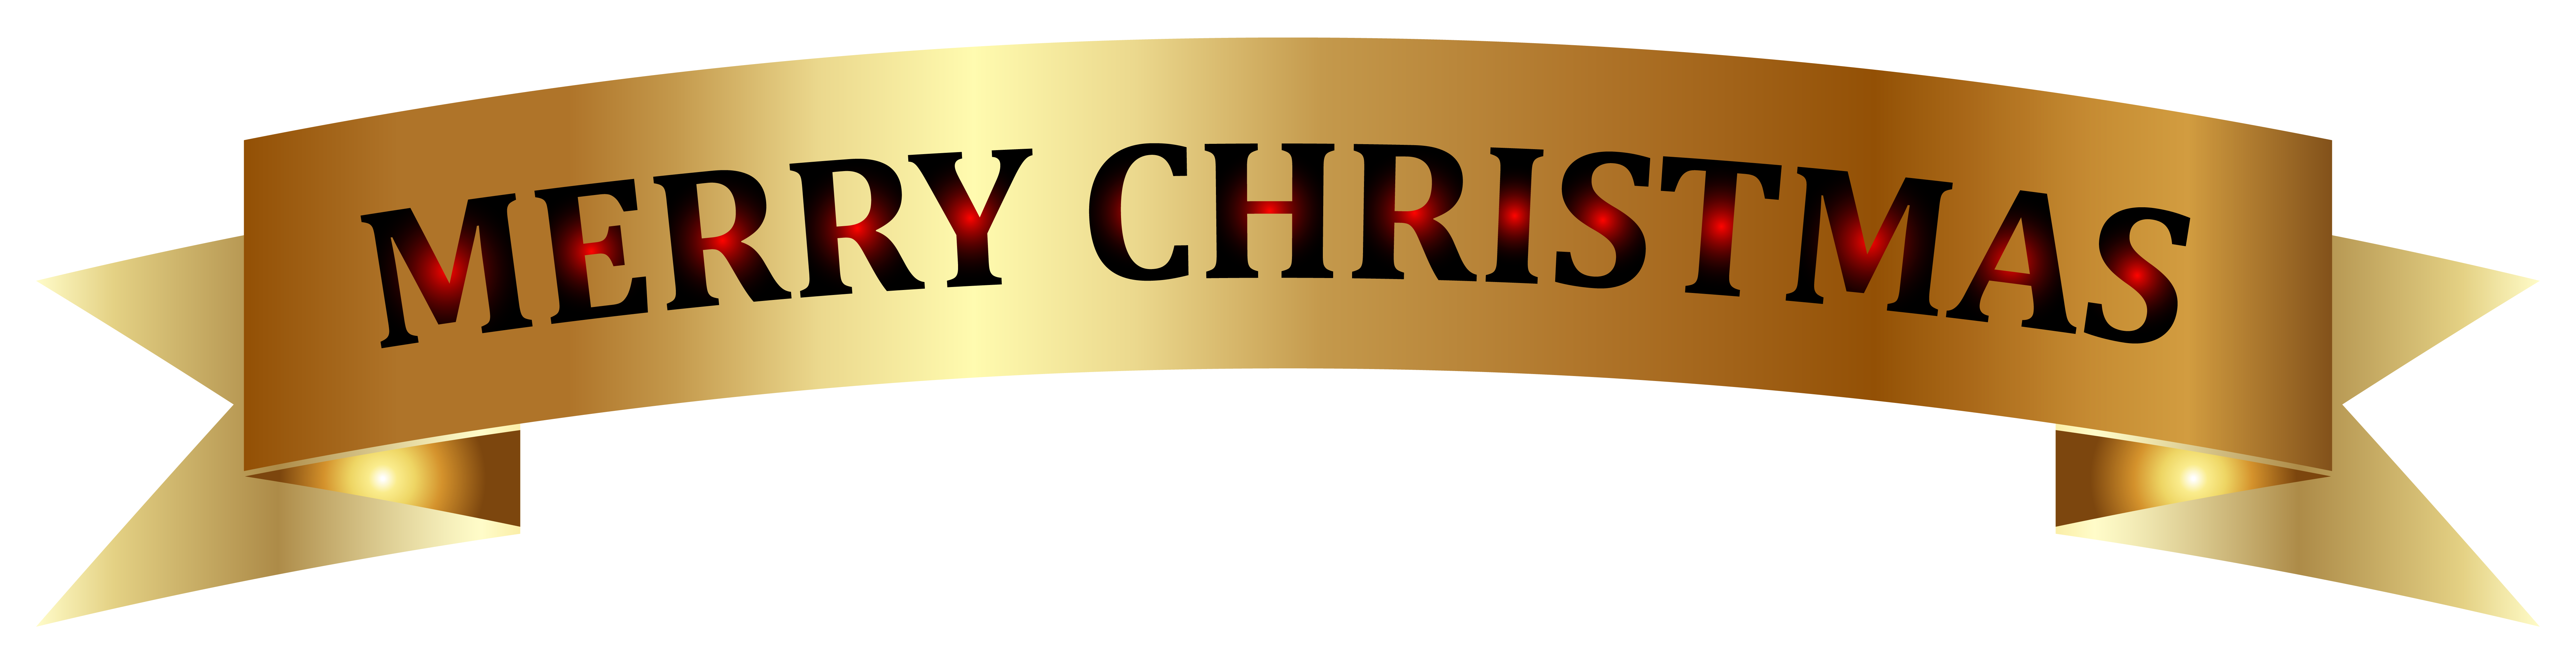 Clipart Christmas Banners